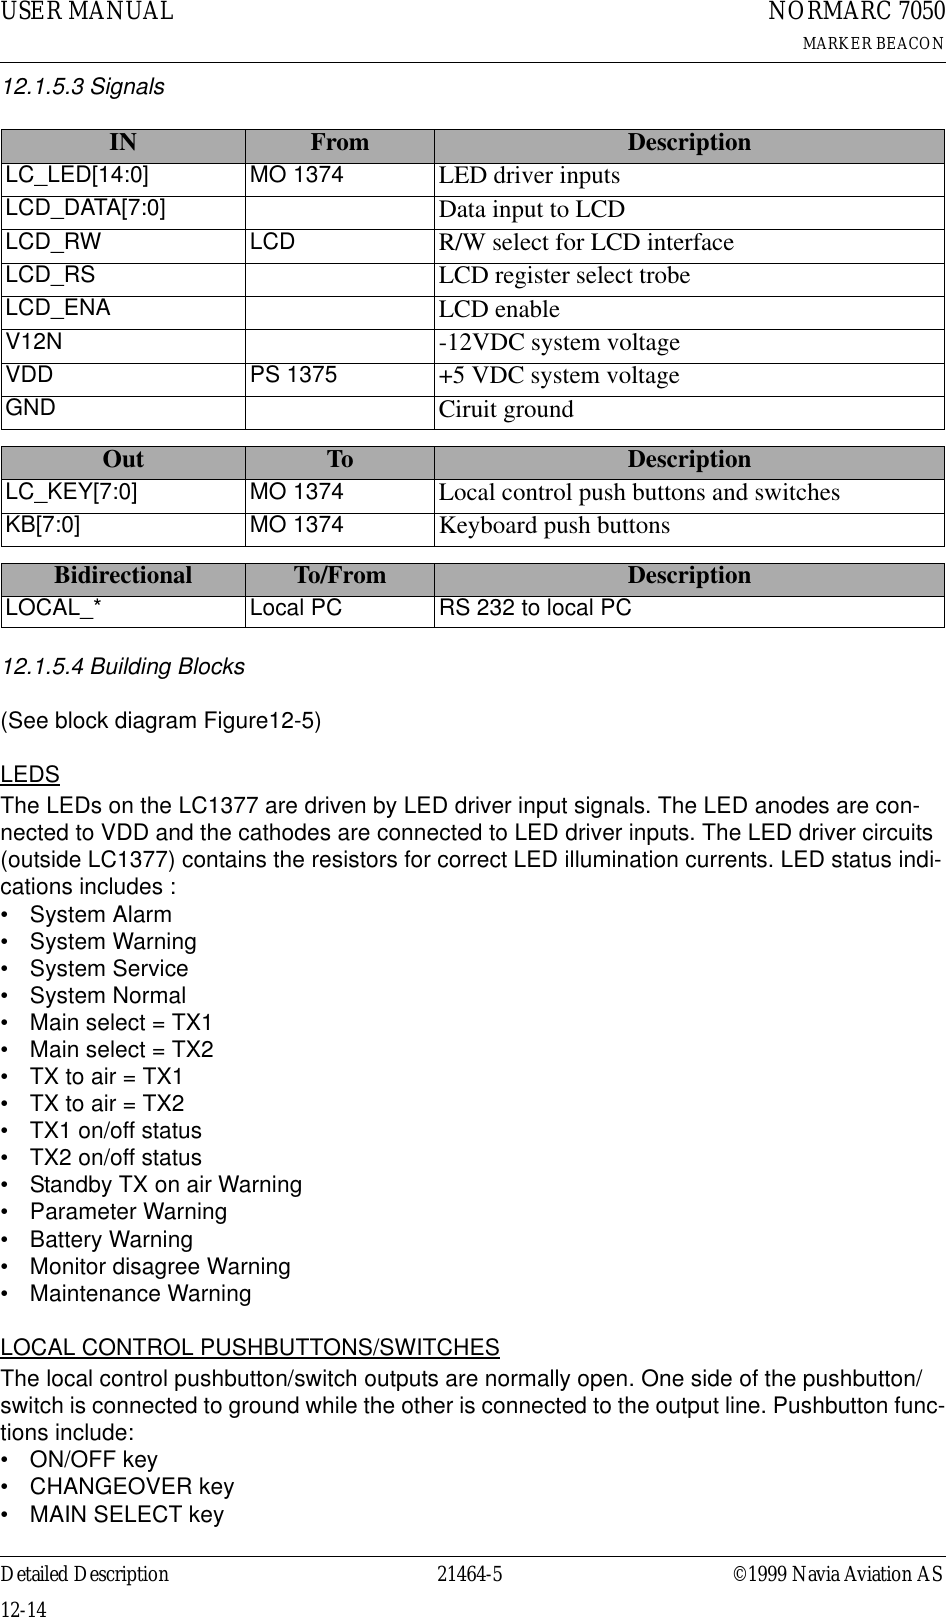 USER MANUAL12-1421464-5NORMARC 7050MARKER BEACONDetailed Description ©1999 Navia Aviation AS12.1.5.3 Signals12.1.5.4 Building Blocks  (See block diagram Figure12-5)LEDSThe LEDs on the LC1377 are driven by LED driver input signals. The LED anodes are con-nected to VDD and the cathodes are connected to LED driver inputs. The LED driver circuits (outside LC1377) contains the resistors for correct LED illumination currents. LED status indi-cations includes :•System Alarm•System Warning•System Service•System Normal• Main select = TX1• Main select = TX2•TX to air = TX1•TX to air = TX2• TX1 on/off status• TX2 on/off status• Standby TX on air Warning• Parameter Warning•Battery Warning• Monitor disagree Warning• Maintenance WarningLOCAL CONTROL PUSHBUTTONS/SWITCHESThe local control pushbutton/switch outputs are normally open. One side of the pushbutton/switch is connected to ground while the other is connected to the output line. Pushbutton func-tions include:• ON/OFF key• CHANGEOVER key• MAIN SELECT keyIN From DescriptionLC_LED[14:0] MO 1374 LED driver inputs LCD_DATA[7:0] Data input to LCDLCD_RW LCD R/W select for LCD interfaceLCD_RS LCD register select trobeLCD_ENA LCD enableV12N -12VDC system voltageVDD PS 1375 +5 VDC system voltageGND Ciruit groundOut To DescriptionLC_KEY[7:0] MO 1374 Local control push buttons and switchesKB[7:0] MO 1374 Keyboard push buttonsBidirectional To/From DescriptionLOCAL_* Local PC RS 232 to local PC